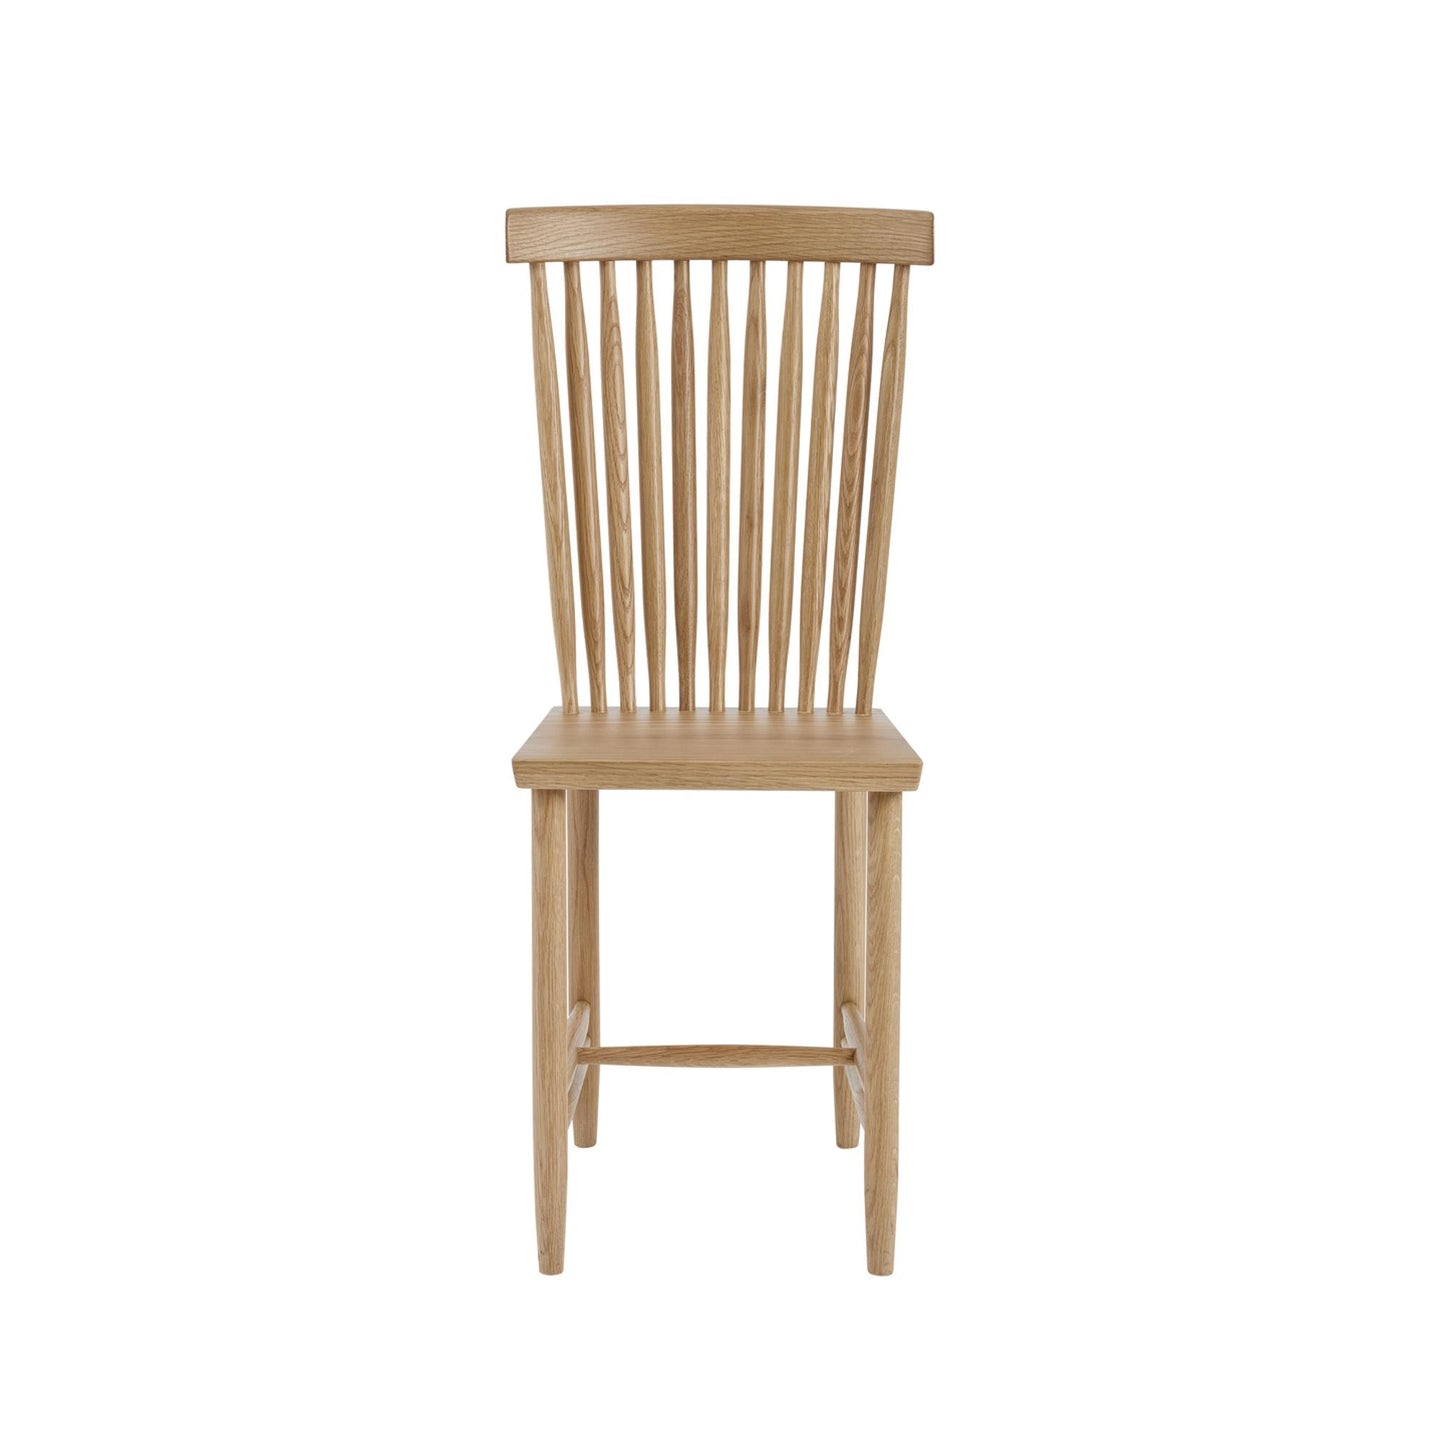 Family No.2 Dining Chair by Design House Stockholm #Oak